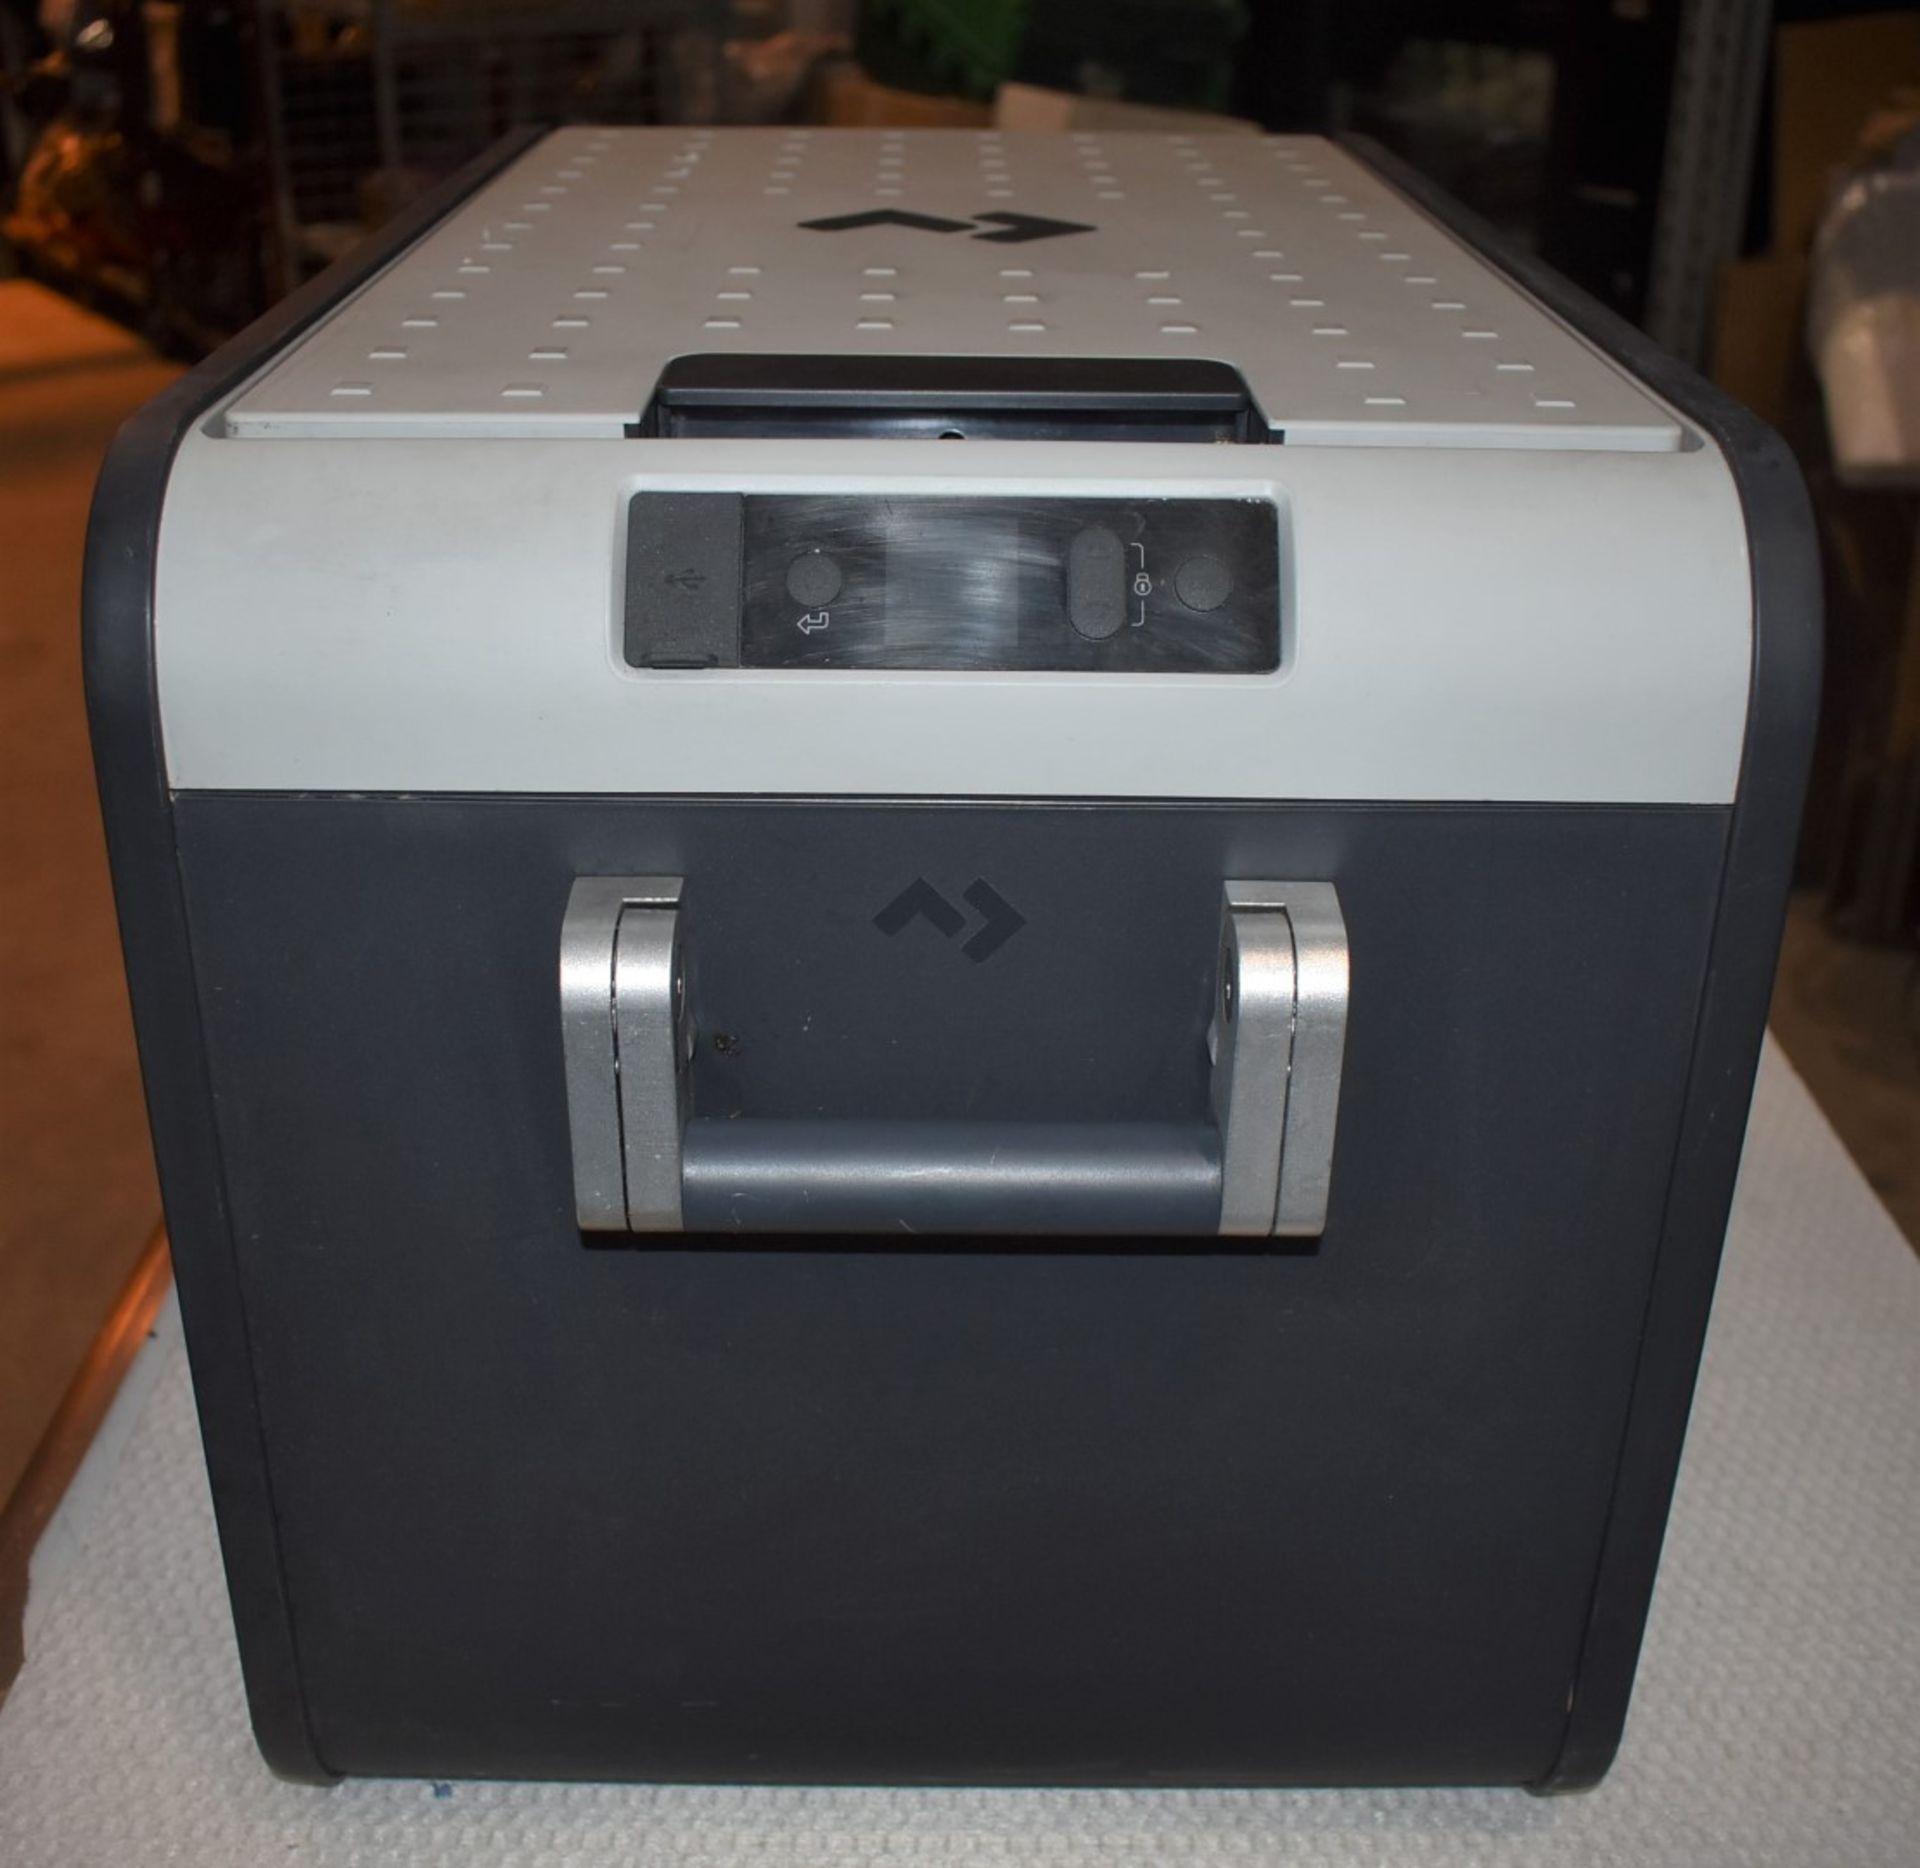 1 x Dometic CFX3 35 Portable 32l Compressor Cooler and Freezer - Perfect For Cooling The Christmas - Image 3 of 9